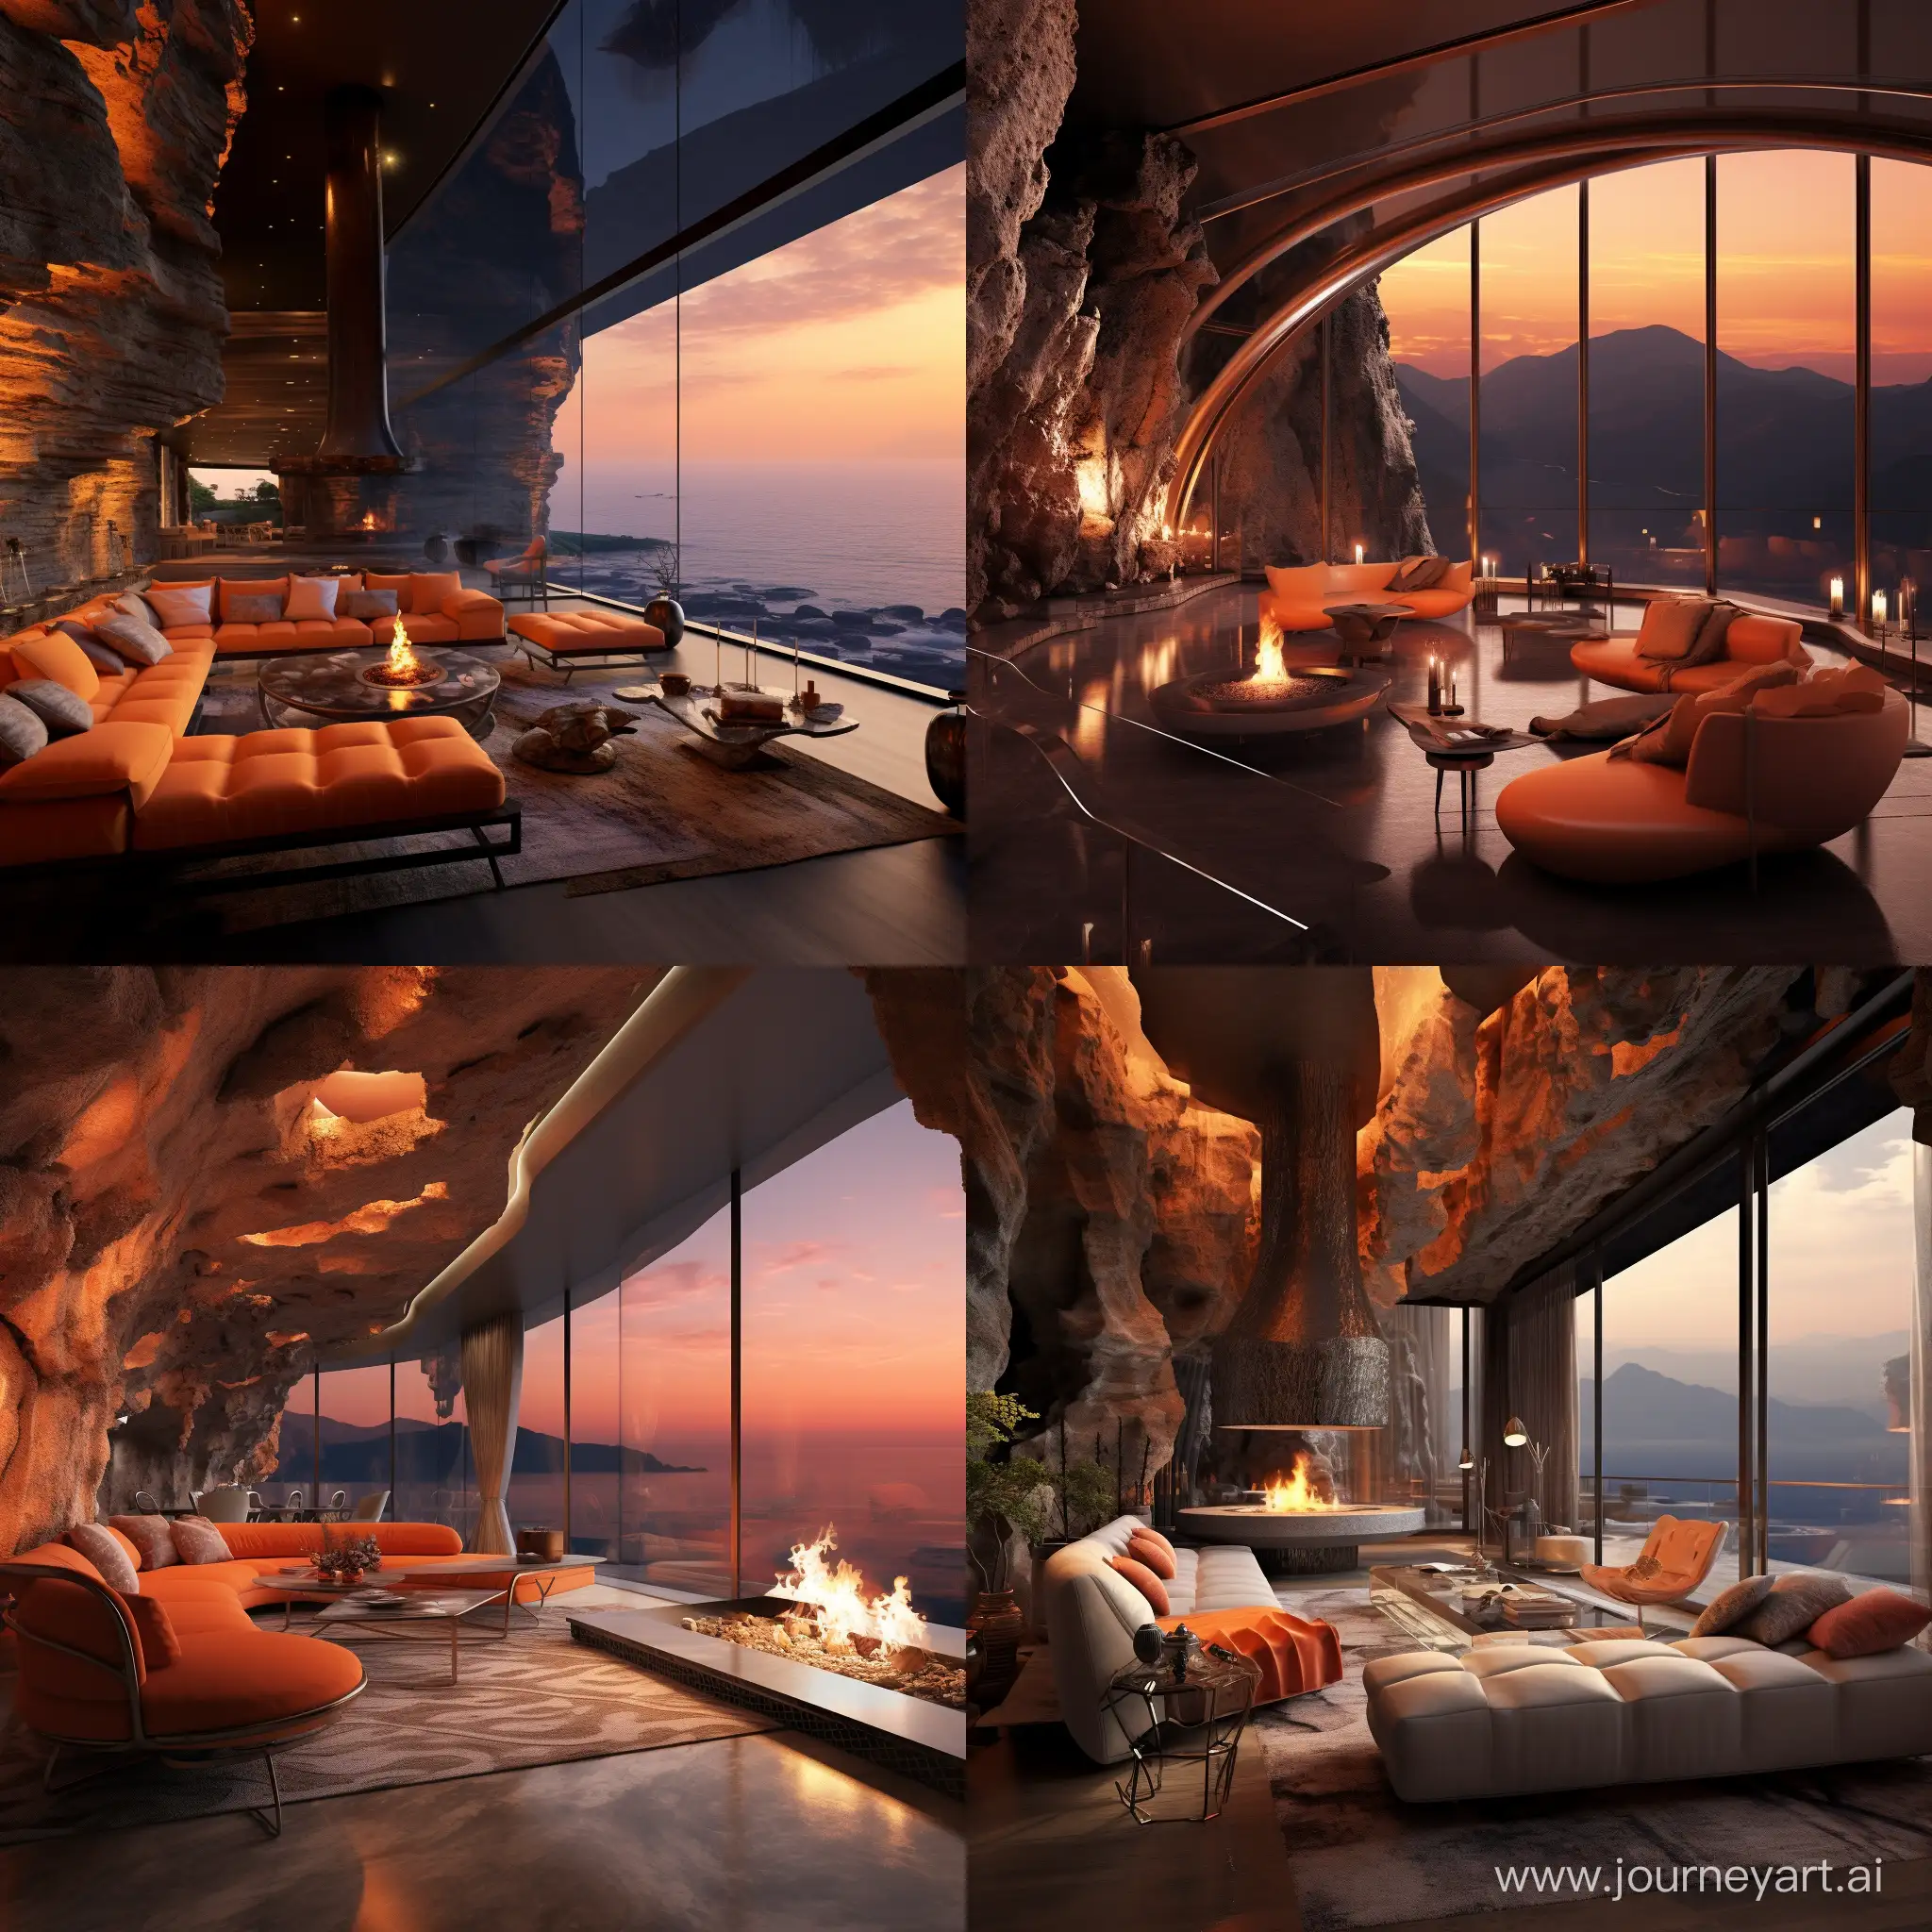 Luxurious-NeoCosmic-Living-Room-Perched-on-Cliffside